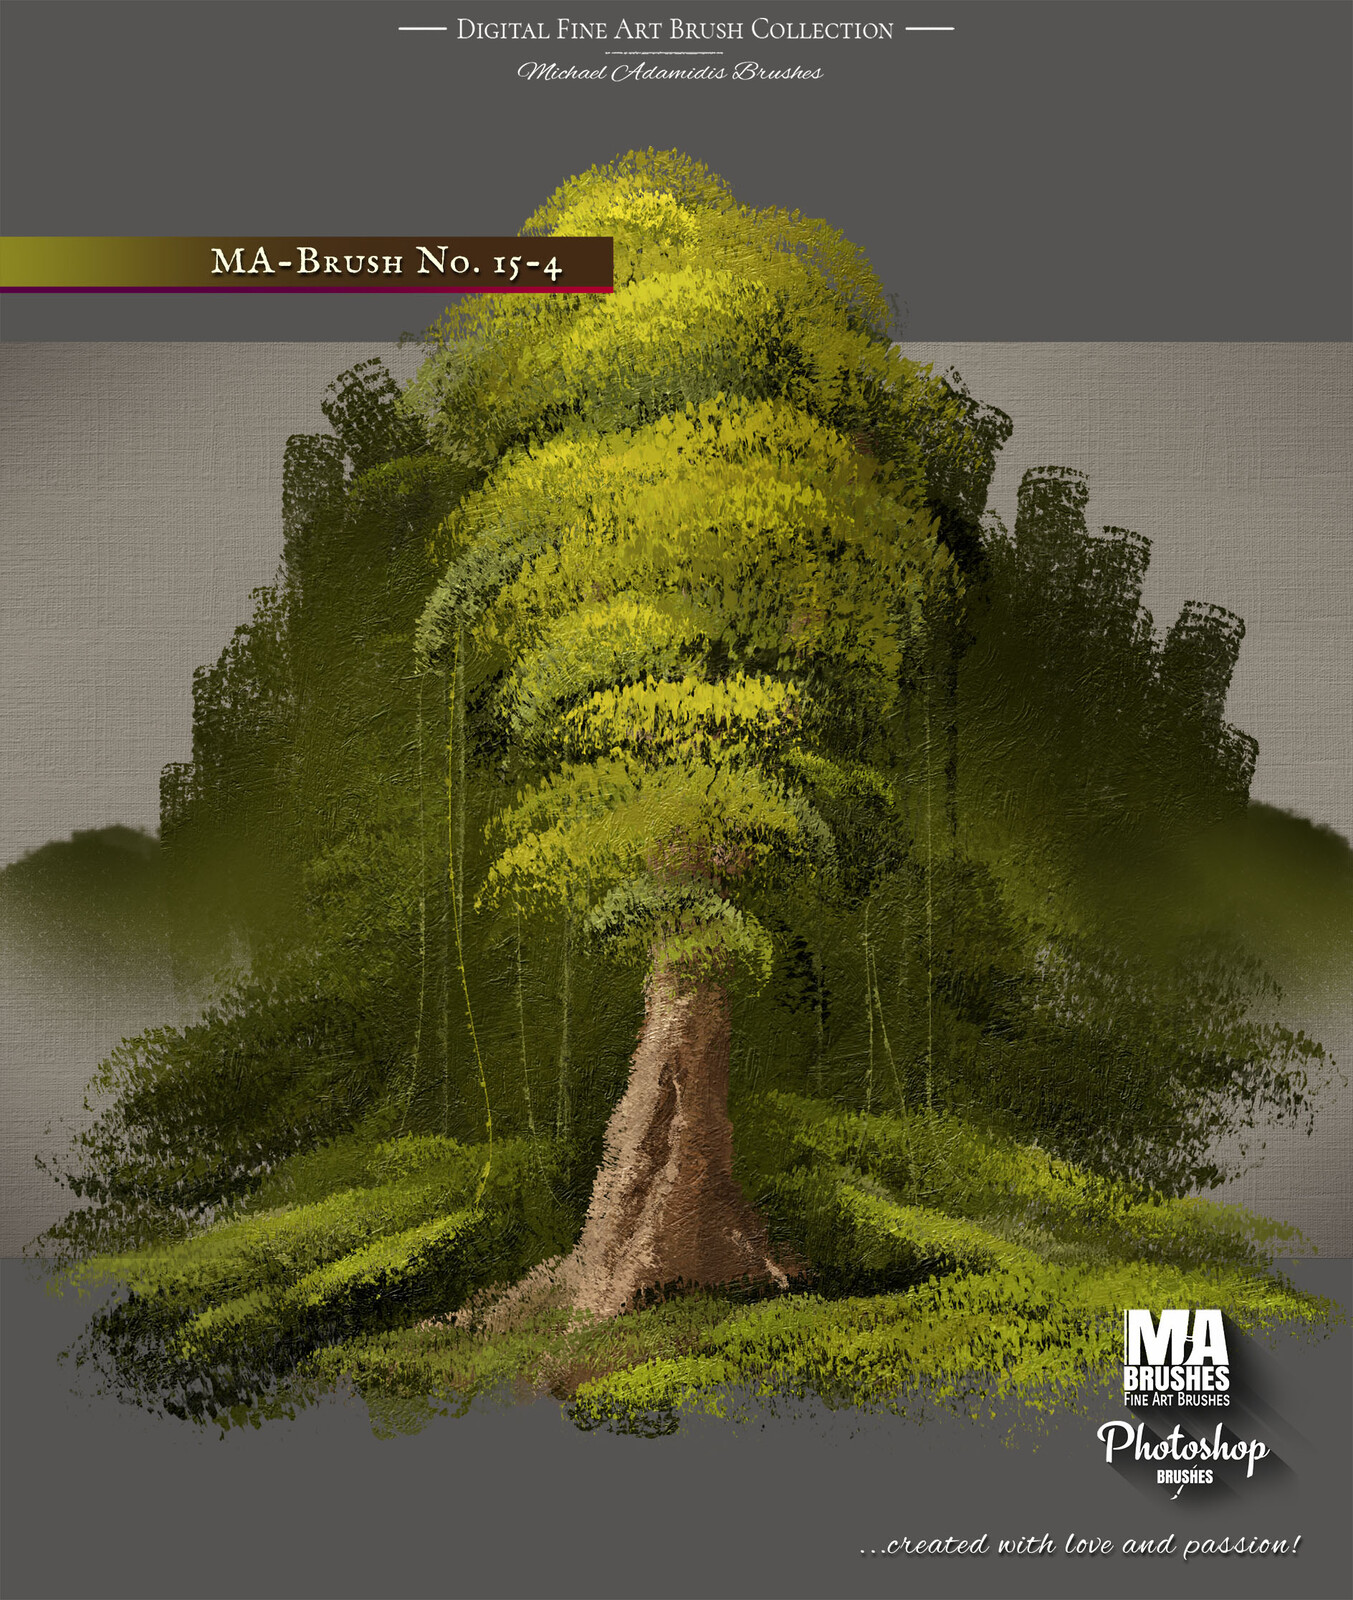 MA-BRUSHES - Most Realistic Photoshop Brushes with Oil Texture! Tree / Foliage / Grass / Leaves 